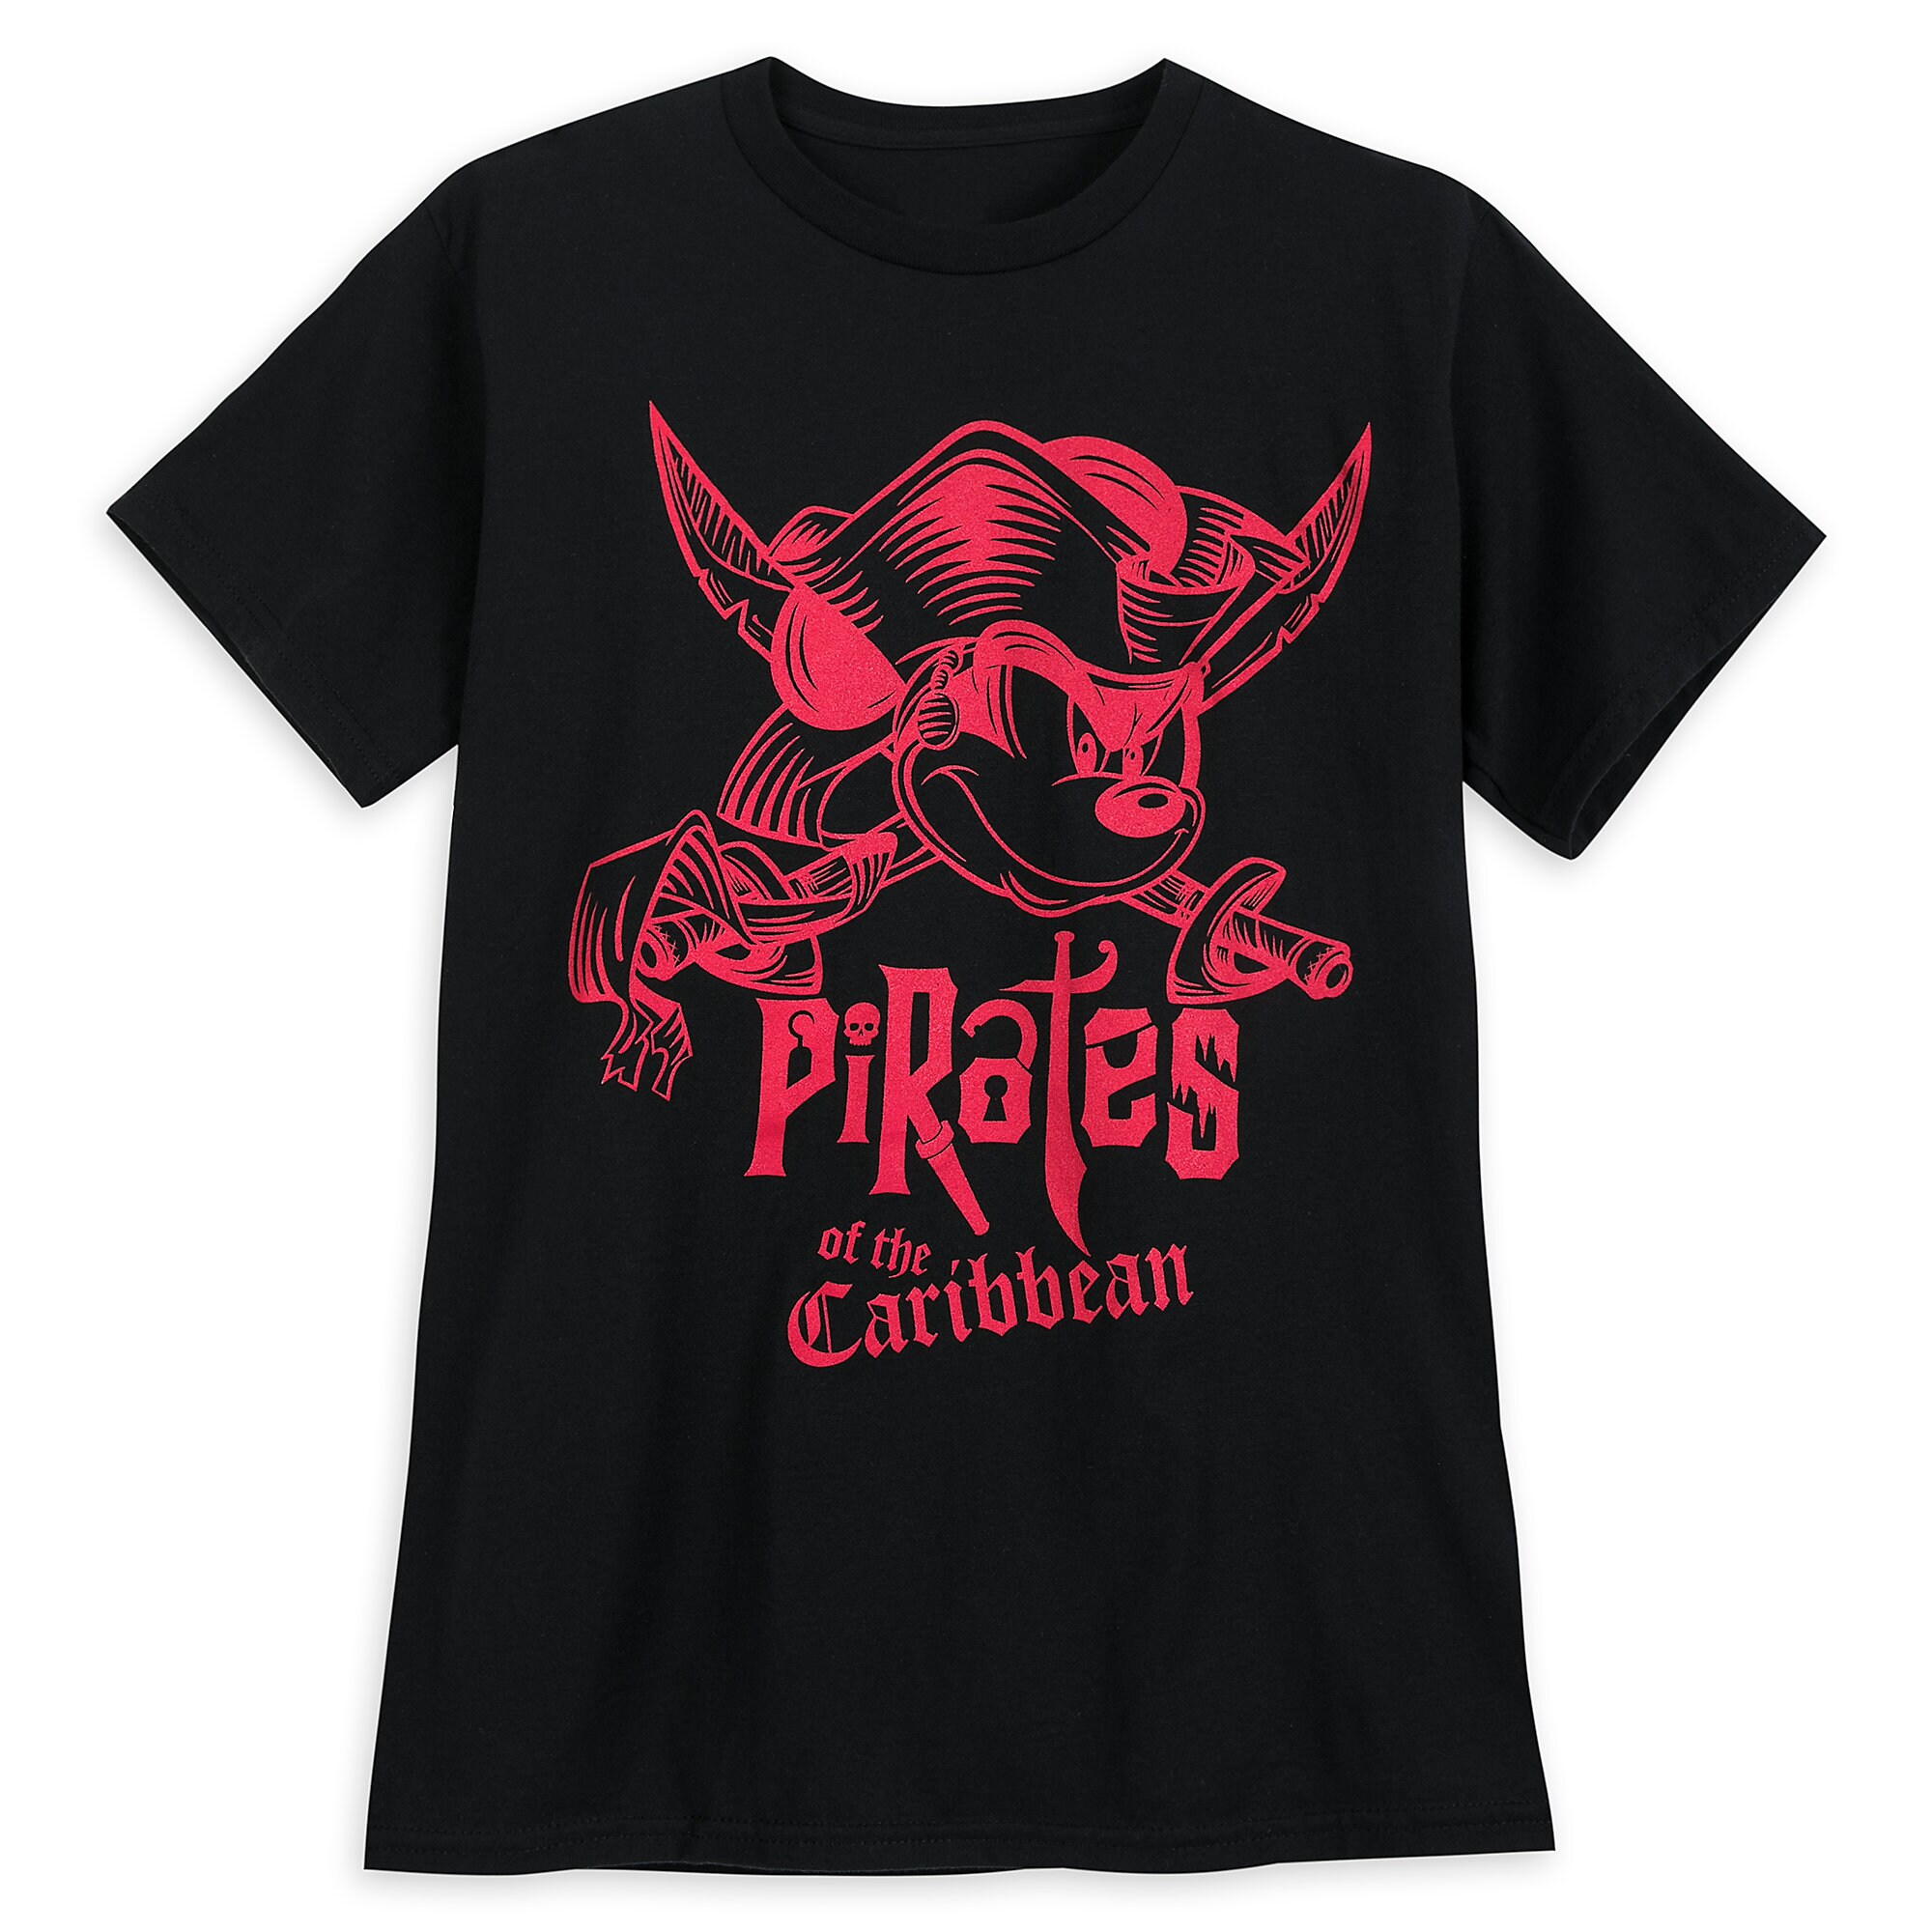 Mickey Mouse Pirates of the Caribbean T-Shirt for Men